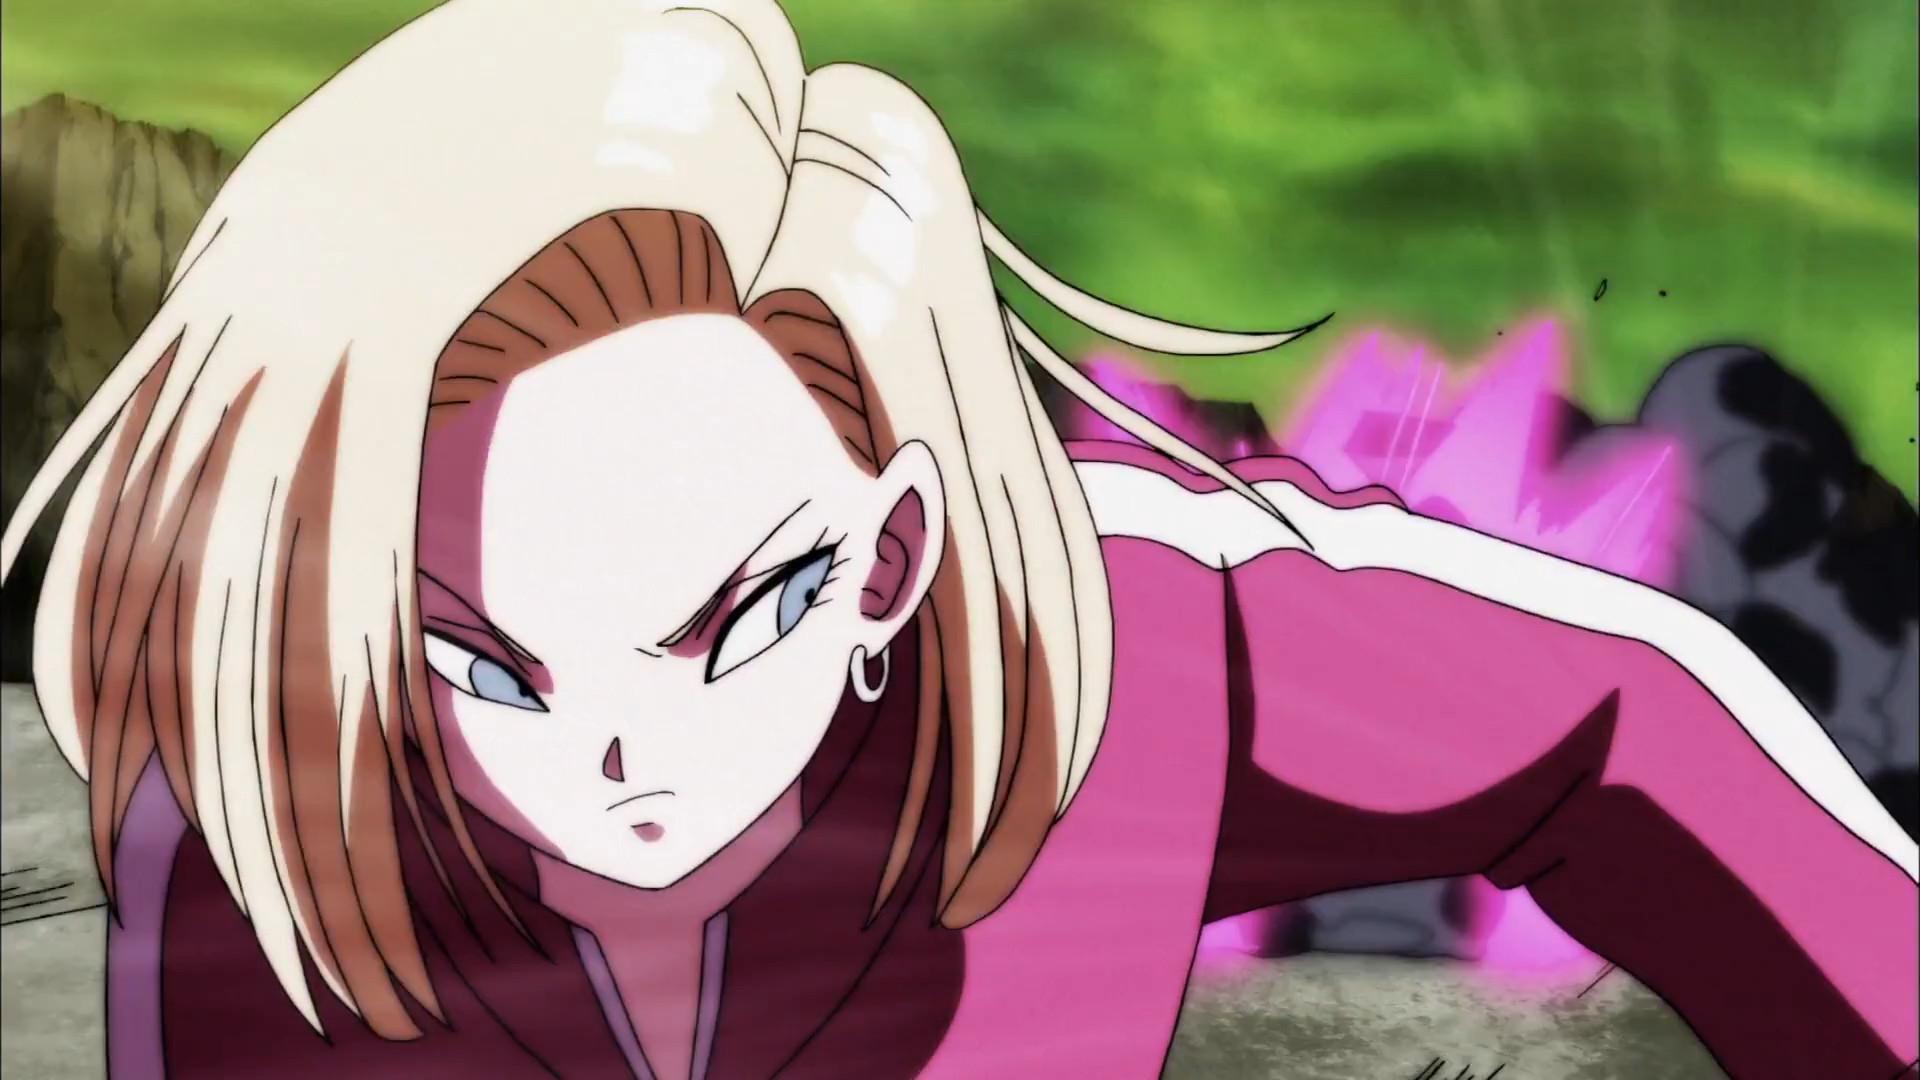 Android 18 naked wallpaper